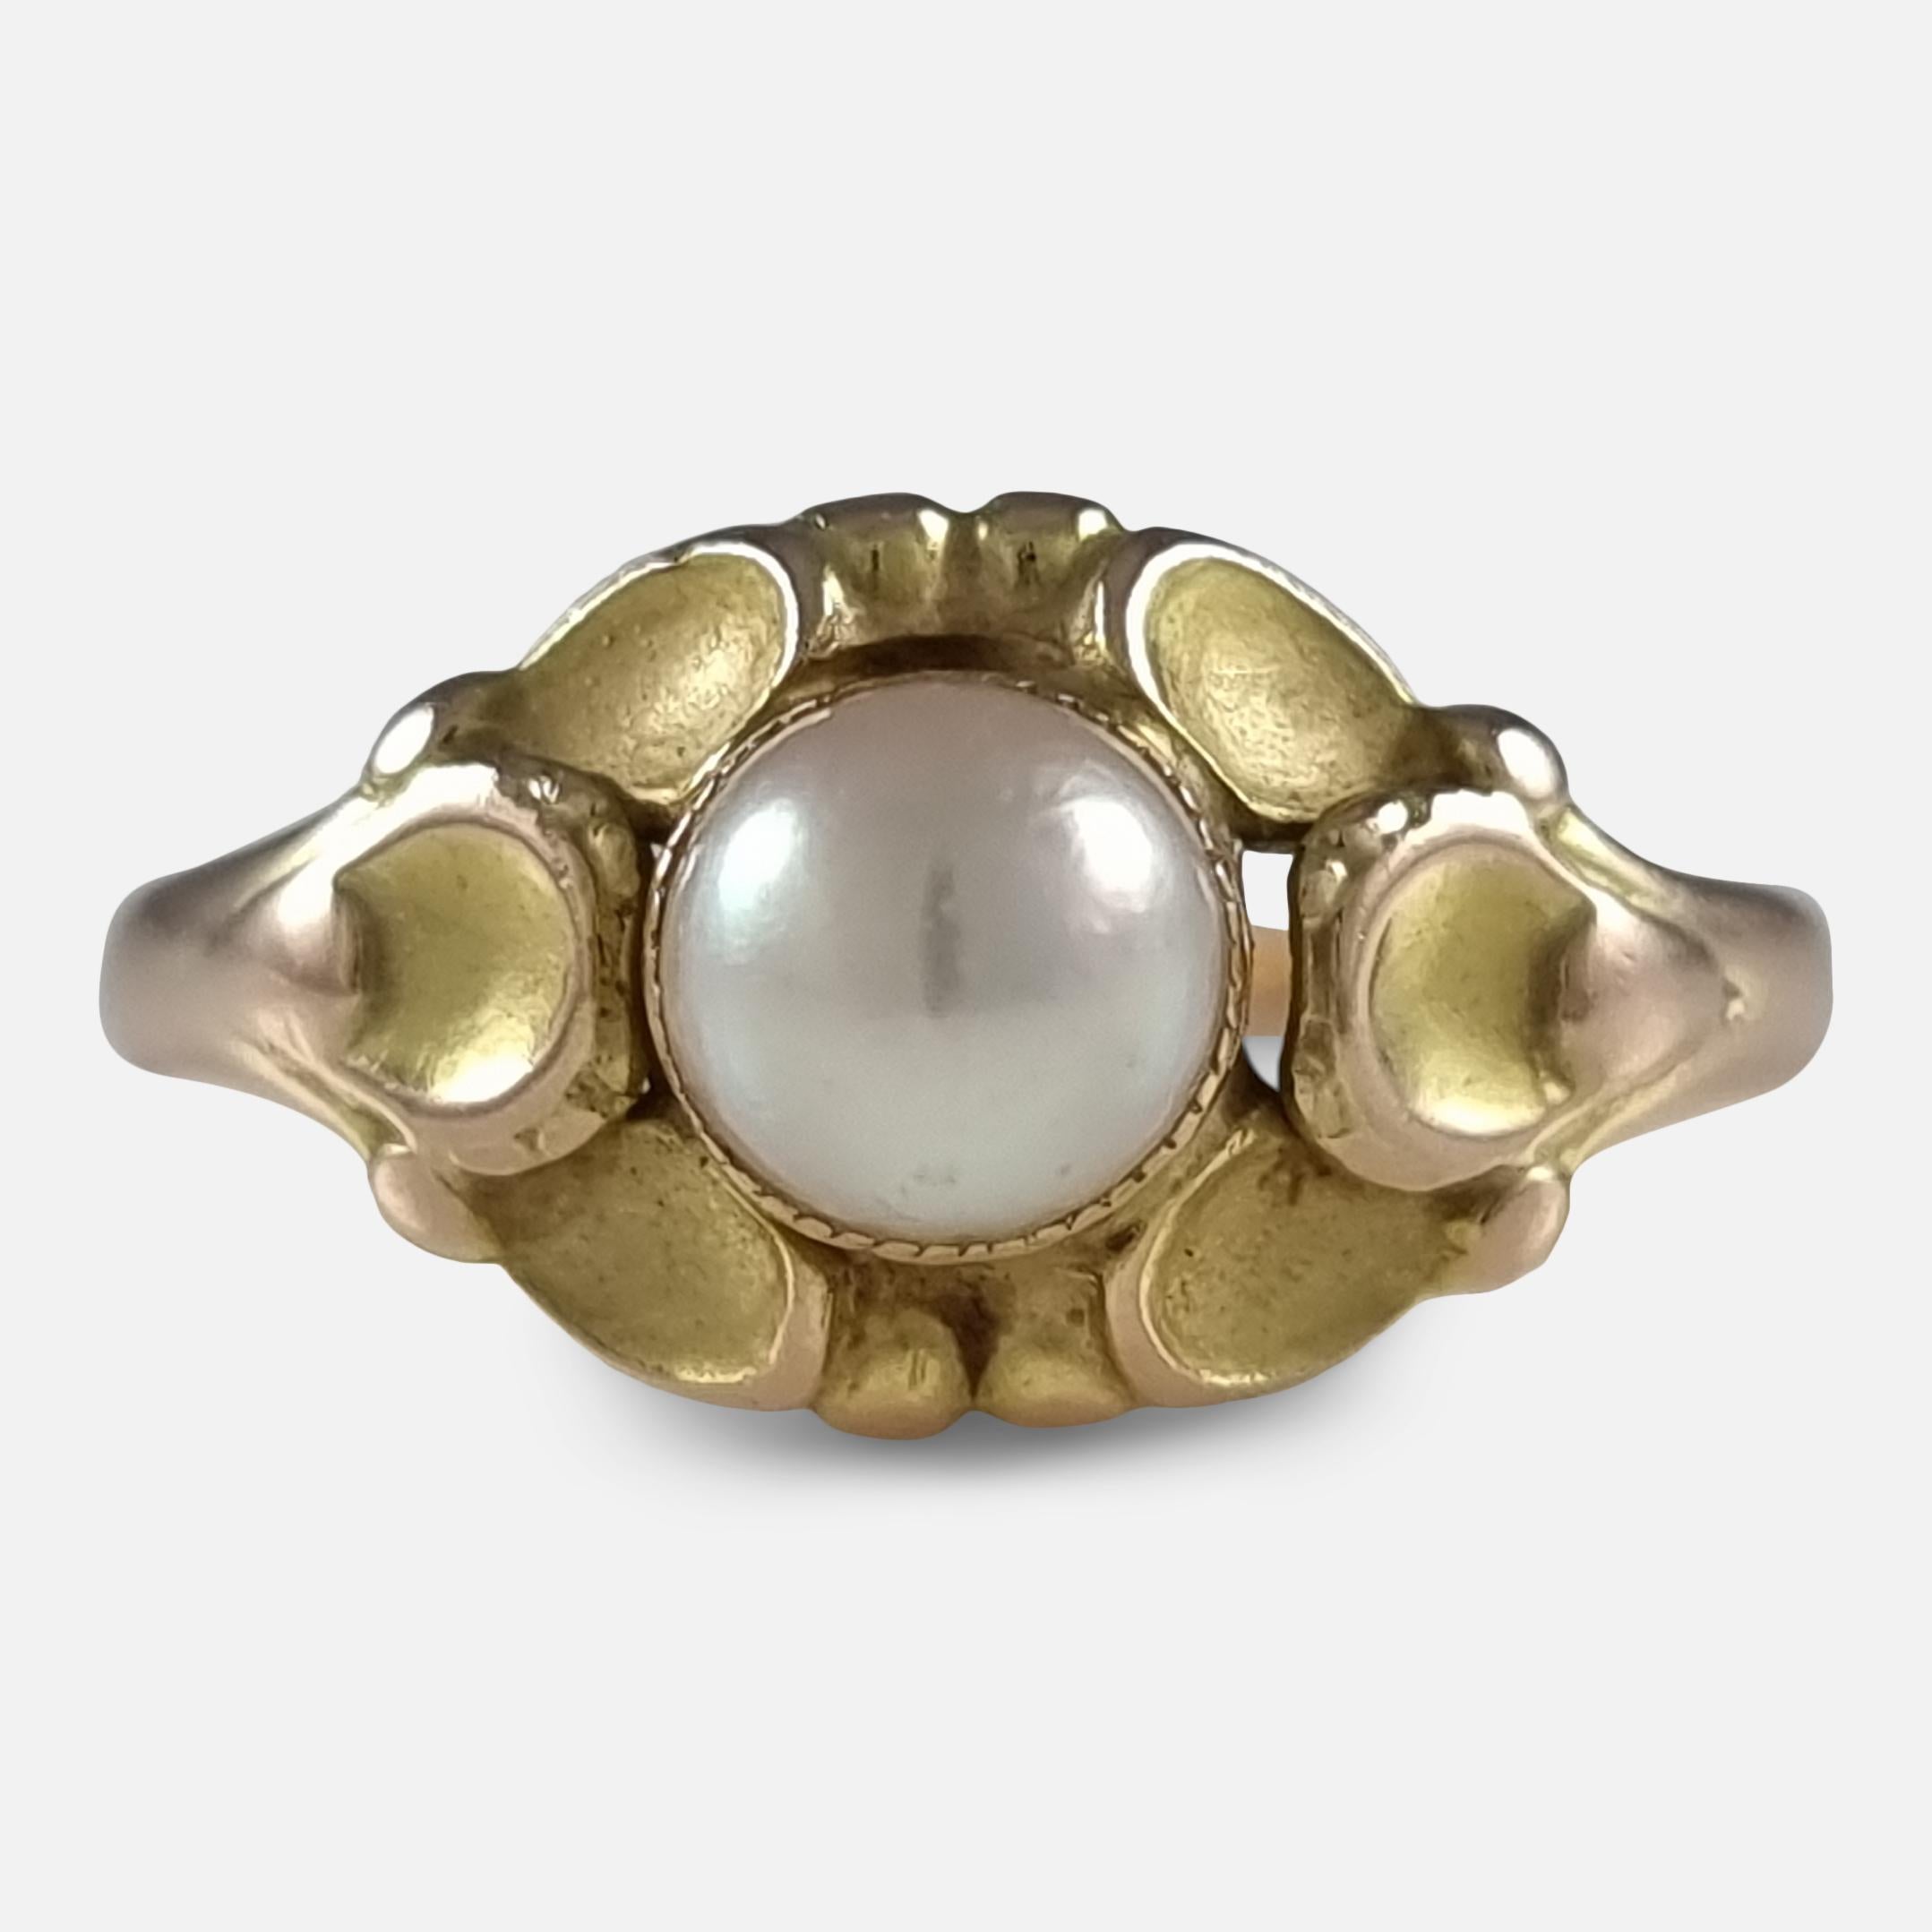 A 14 carat yellow gold and pearl ring, #272, by Georg Jensen.

The ring is stamped with the 'GJ' Georg jensen marks used between 1933-44, '585' to denote 14 carat gold, and '272'.

Period: - Mid 20th Century.

Date: - Circa 1933-44.

Maker: - Georg